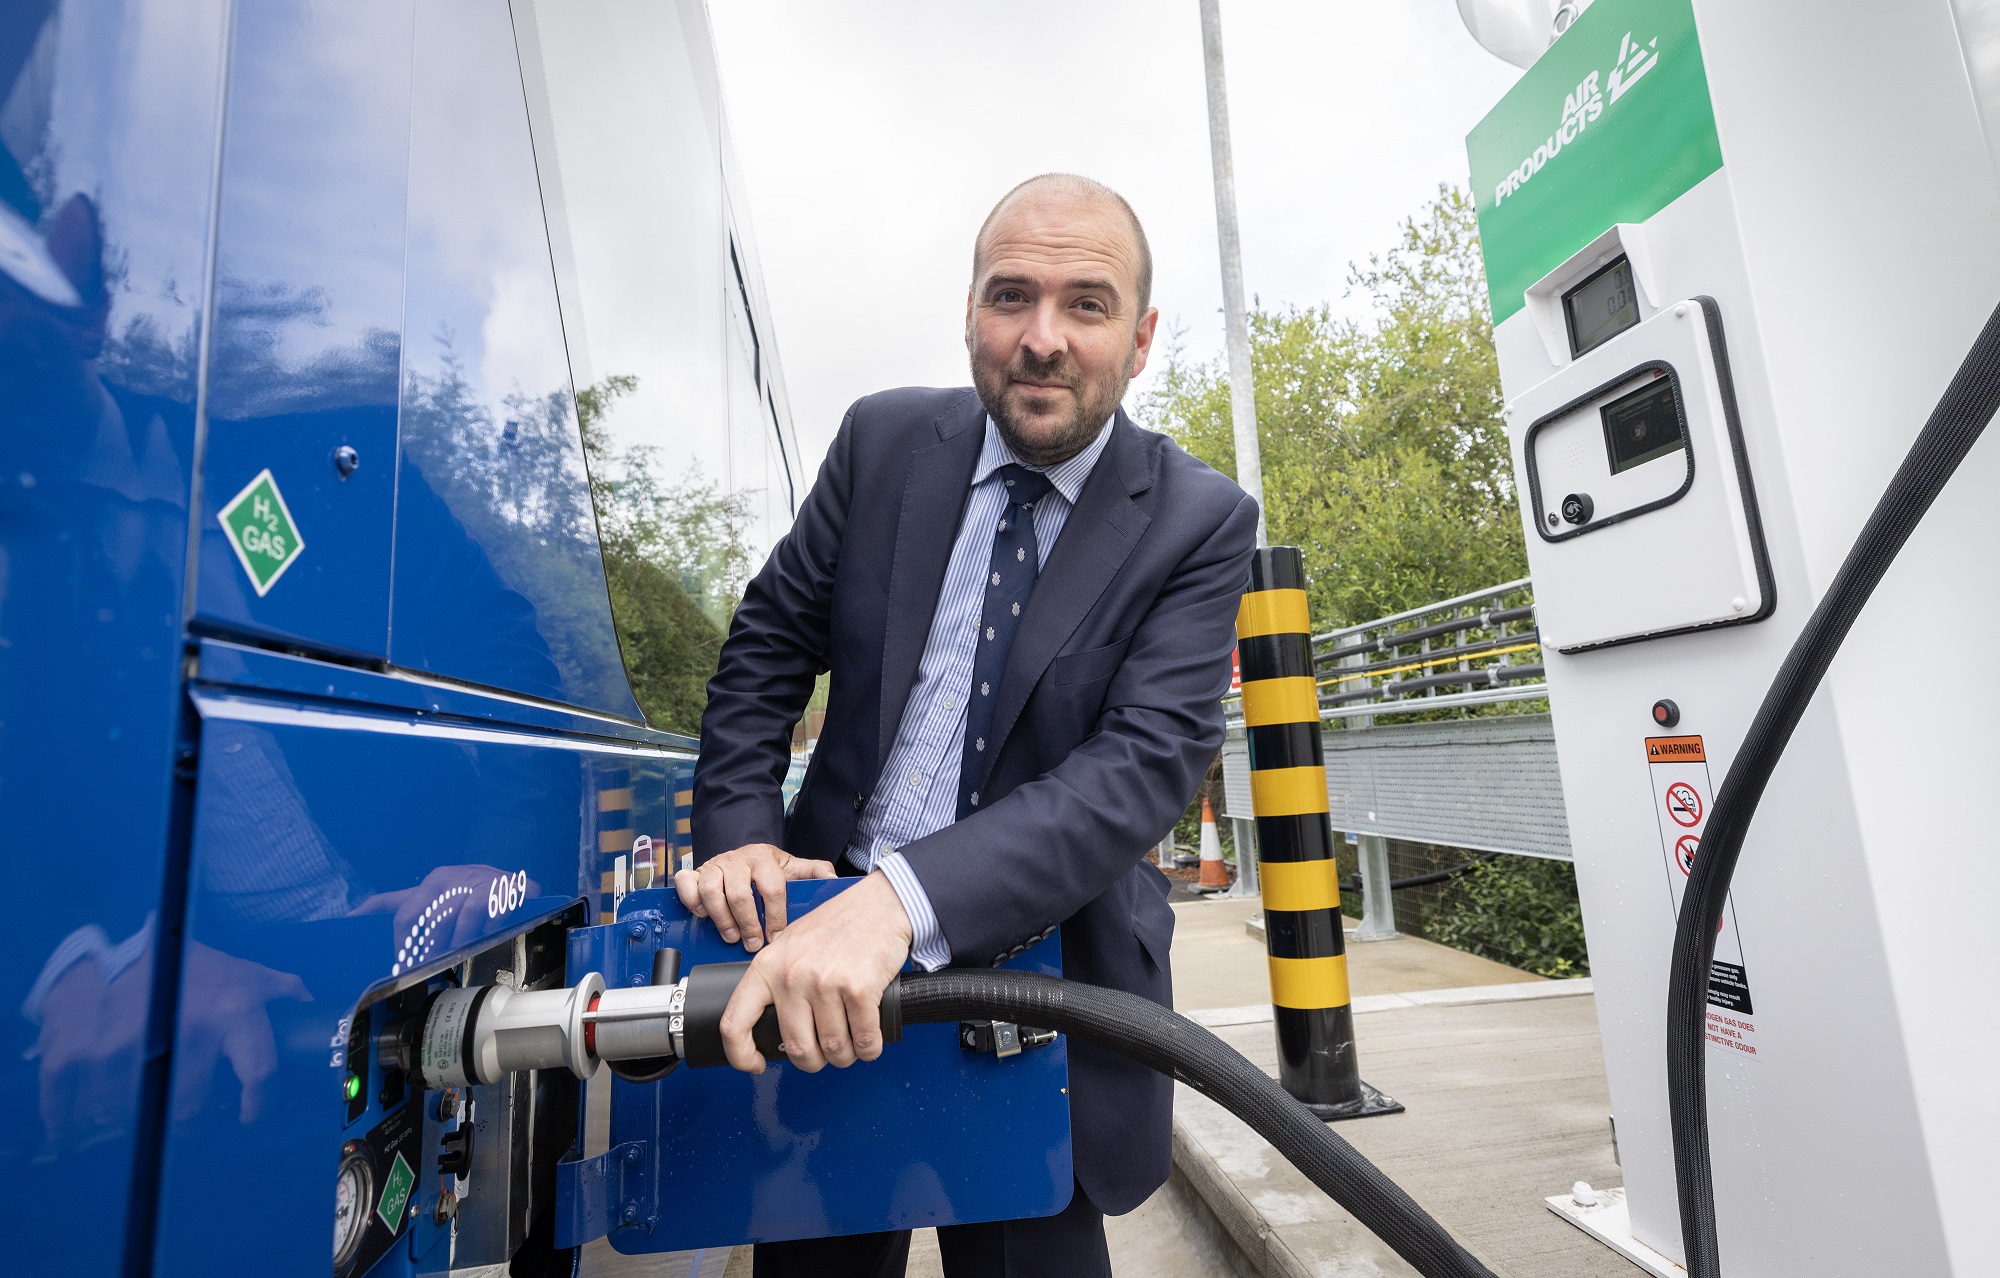 Coach decarbonisation likely to mirror HGV path says Richard Holden